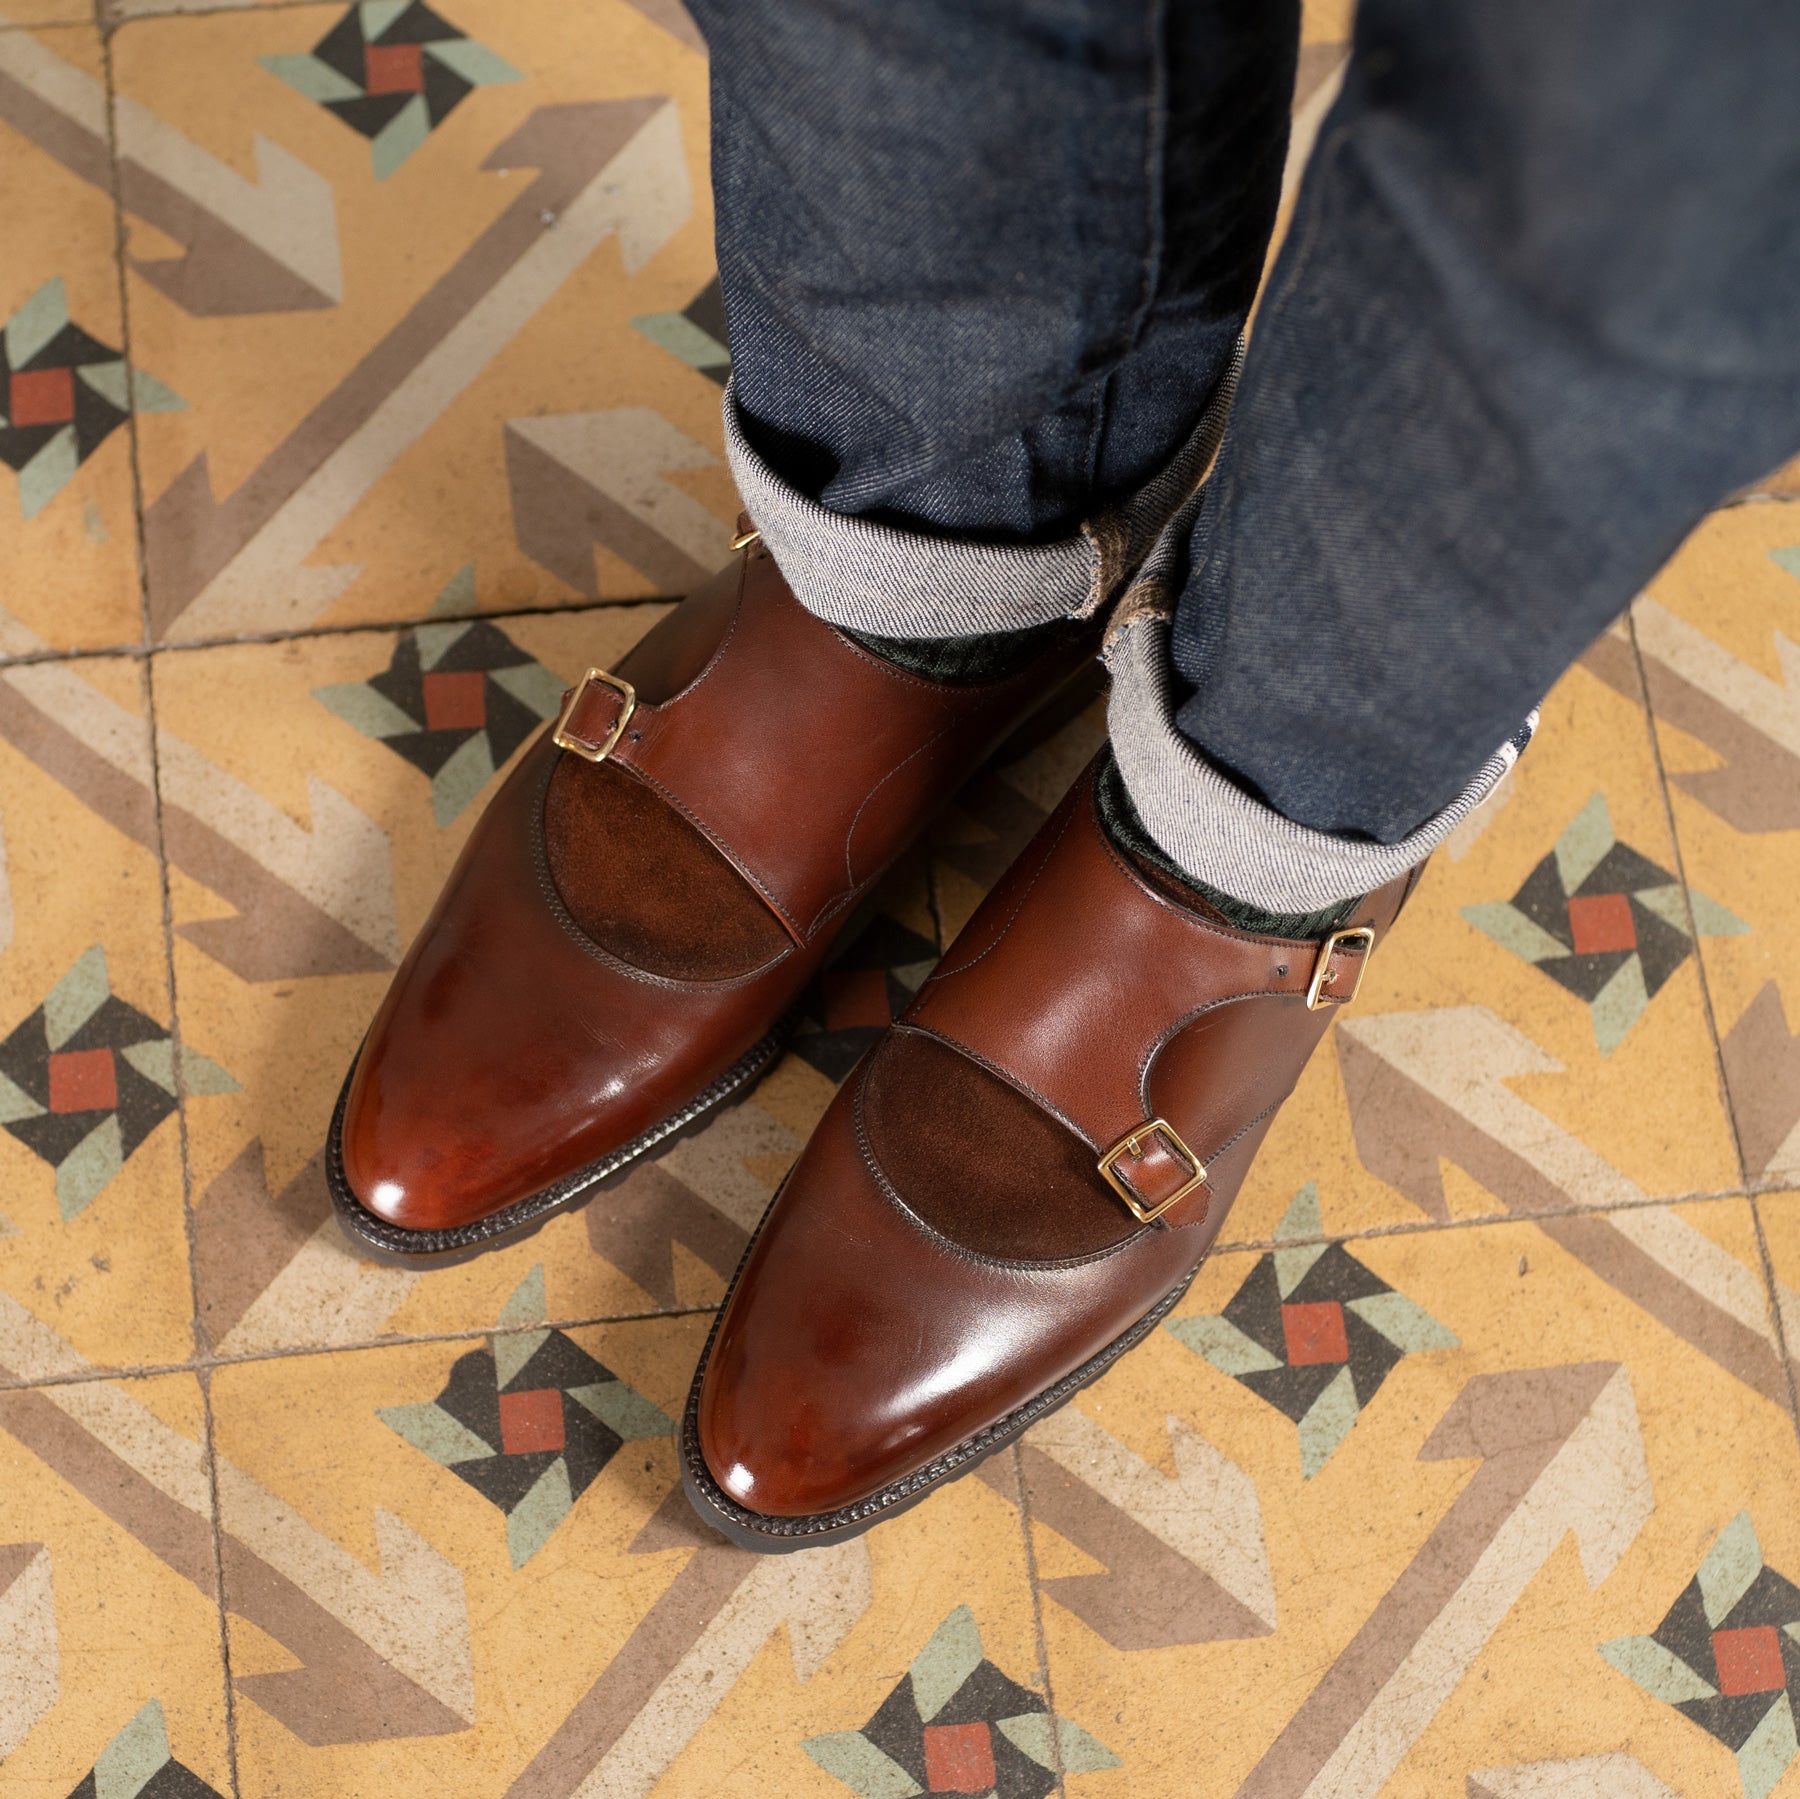 Chelsea Boots - Smart or Casual? - The Shoe Snob Blog